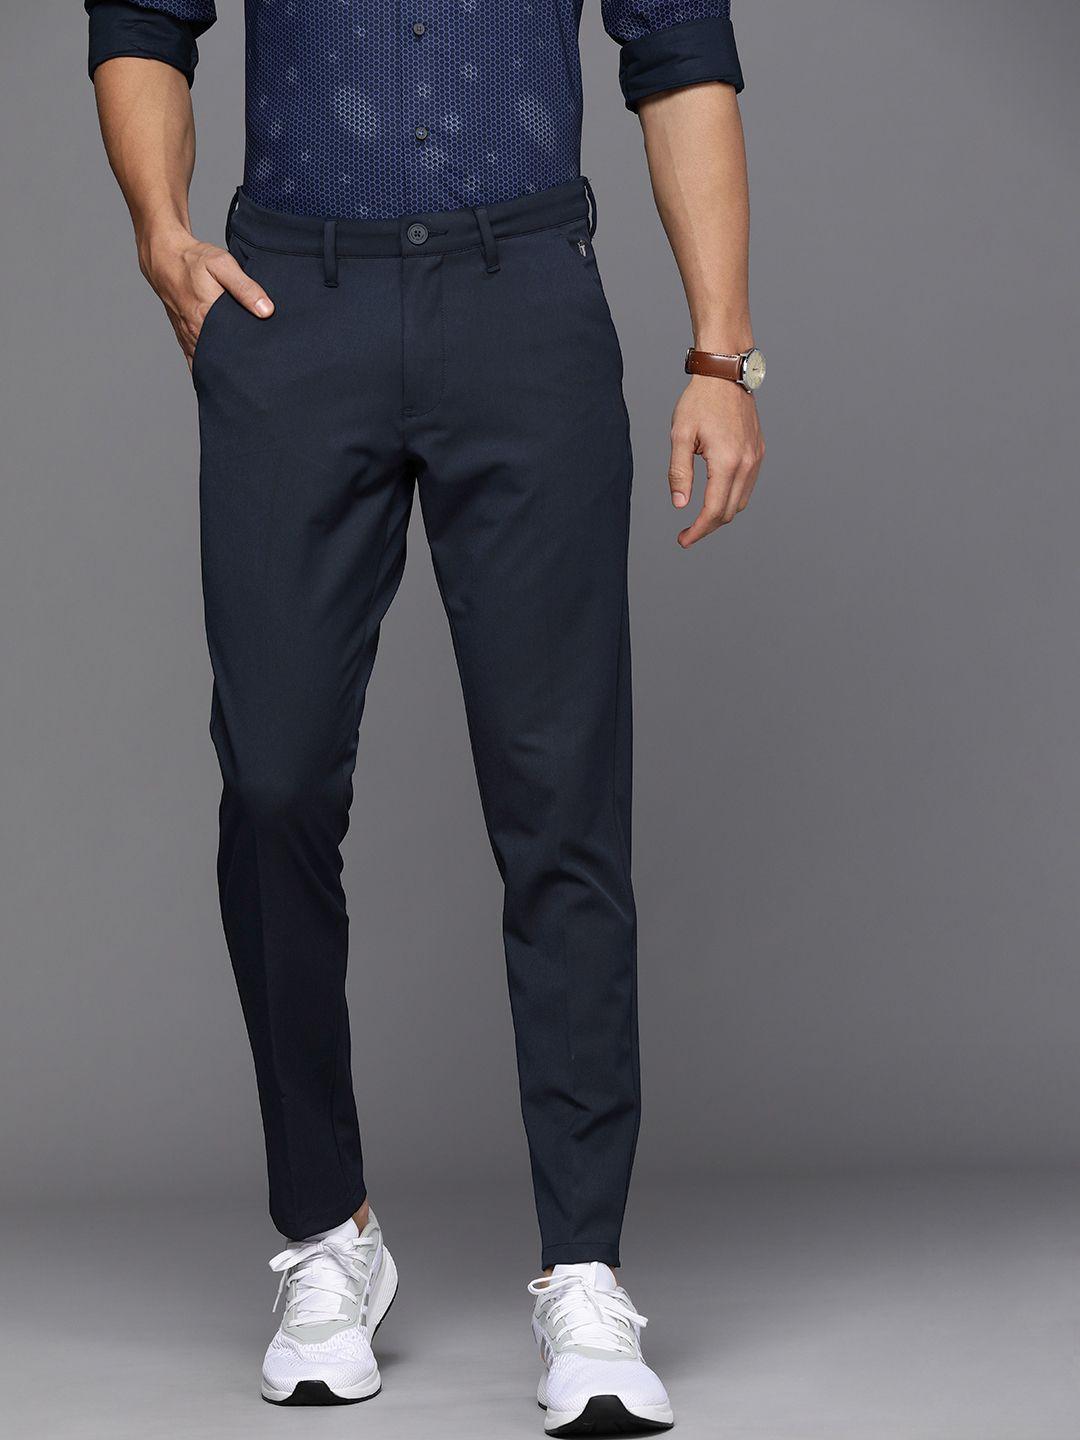 louis philippe ath work men navy blue comfort tapered fit trousers